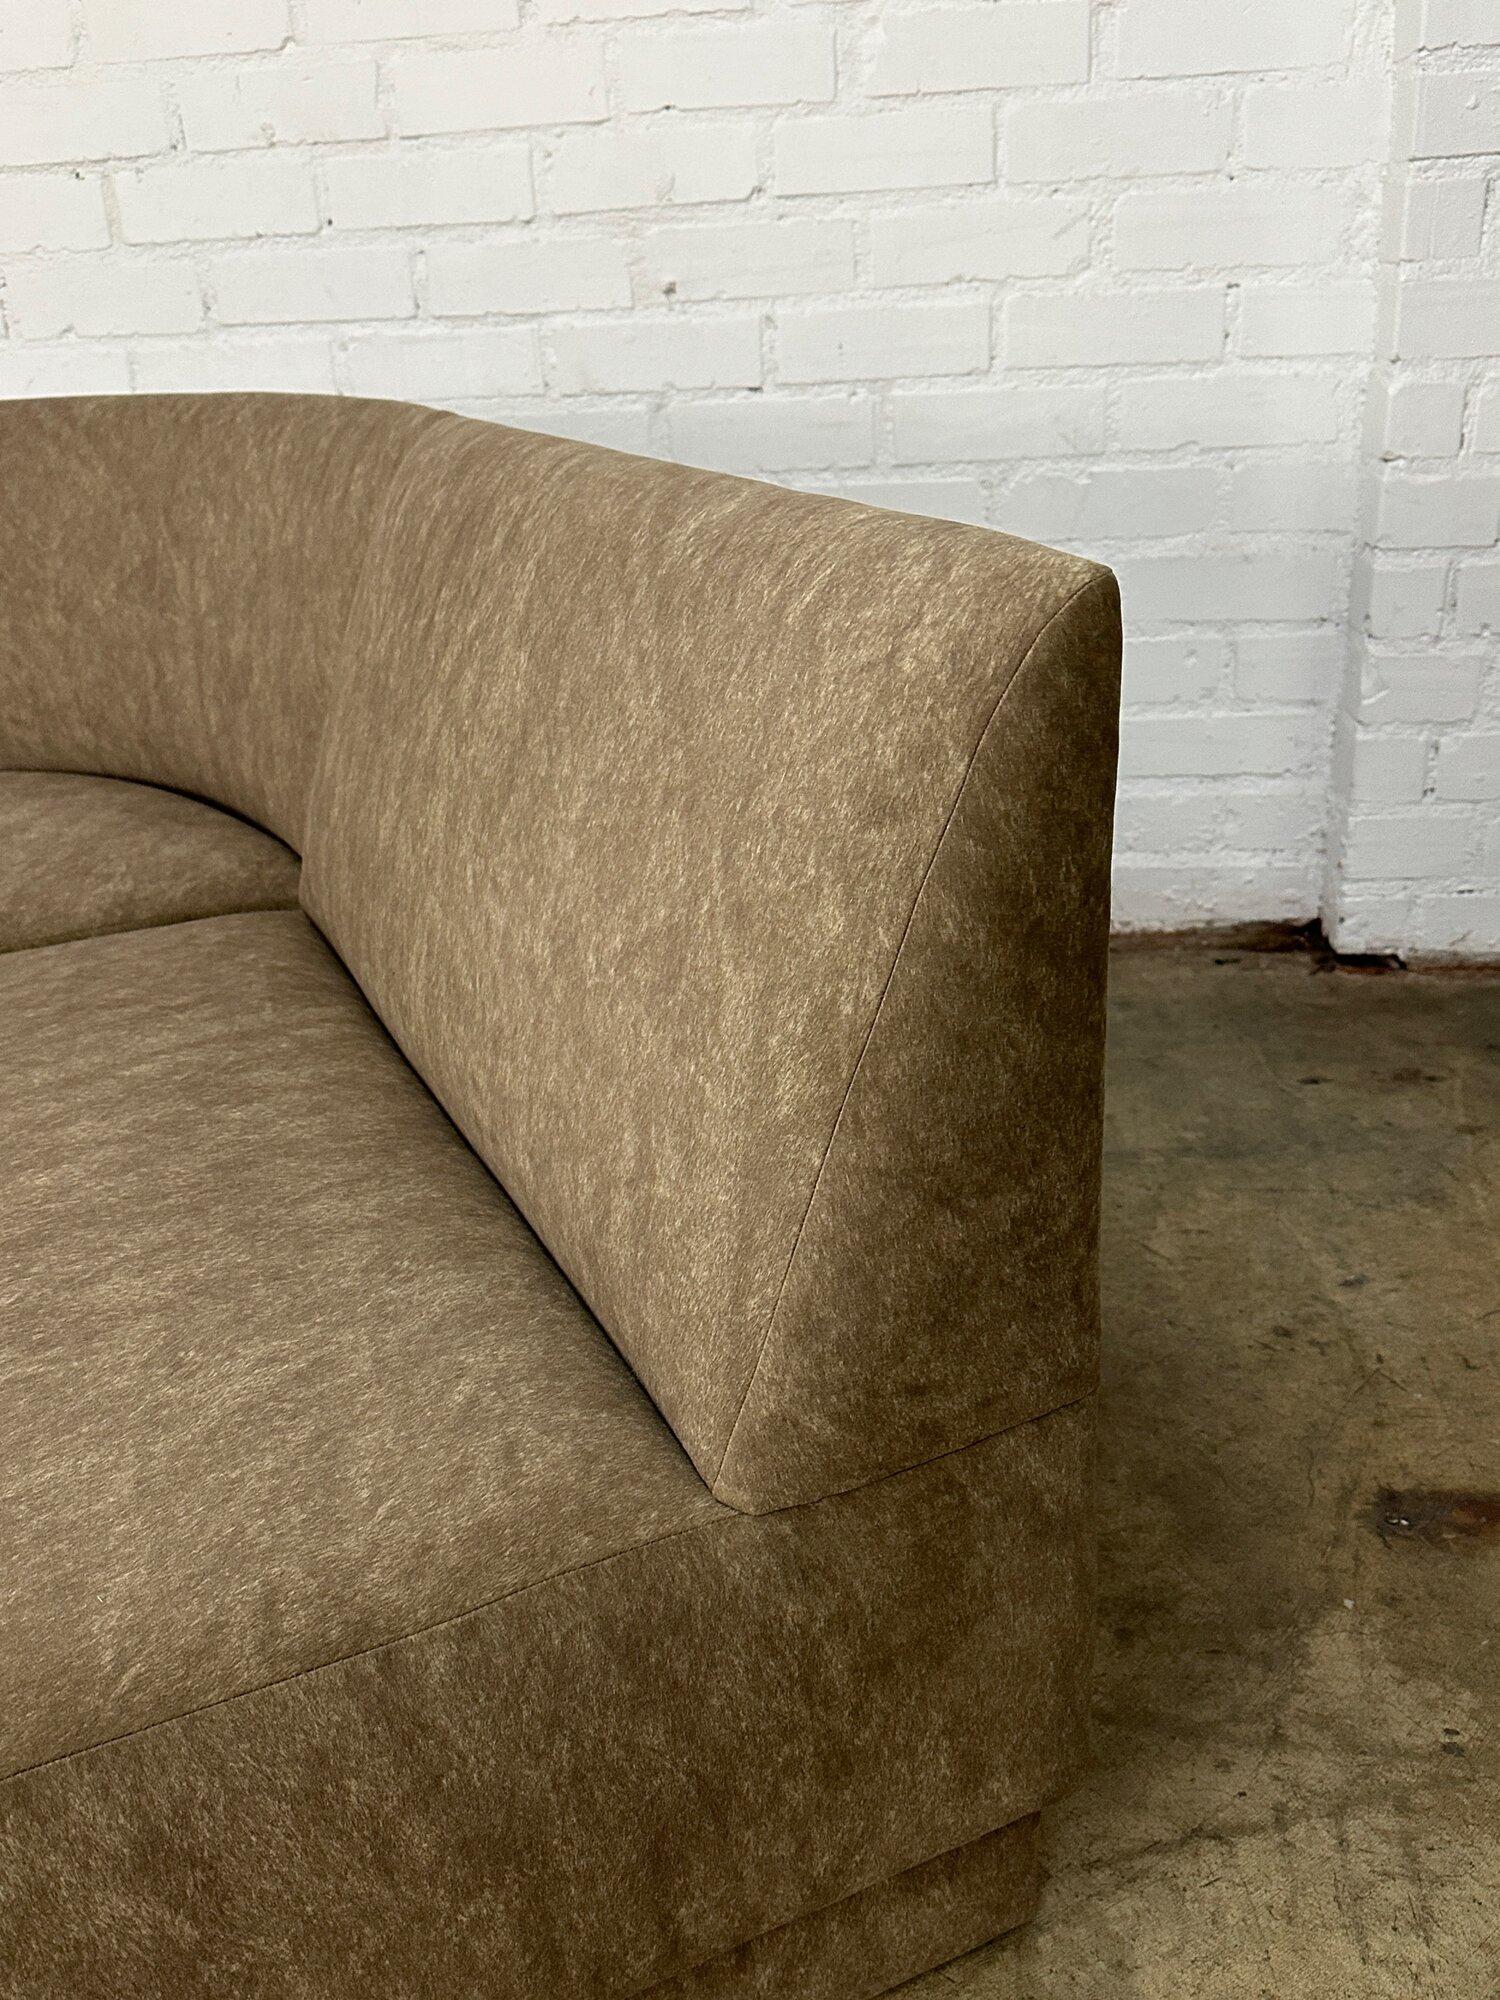 Modular Banquette sofa In Good Condition For Sale In Los Angeles, CA